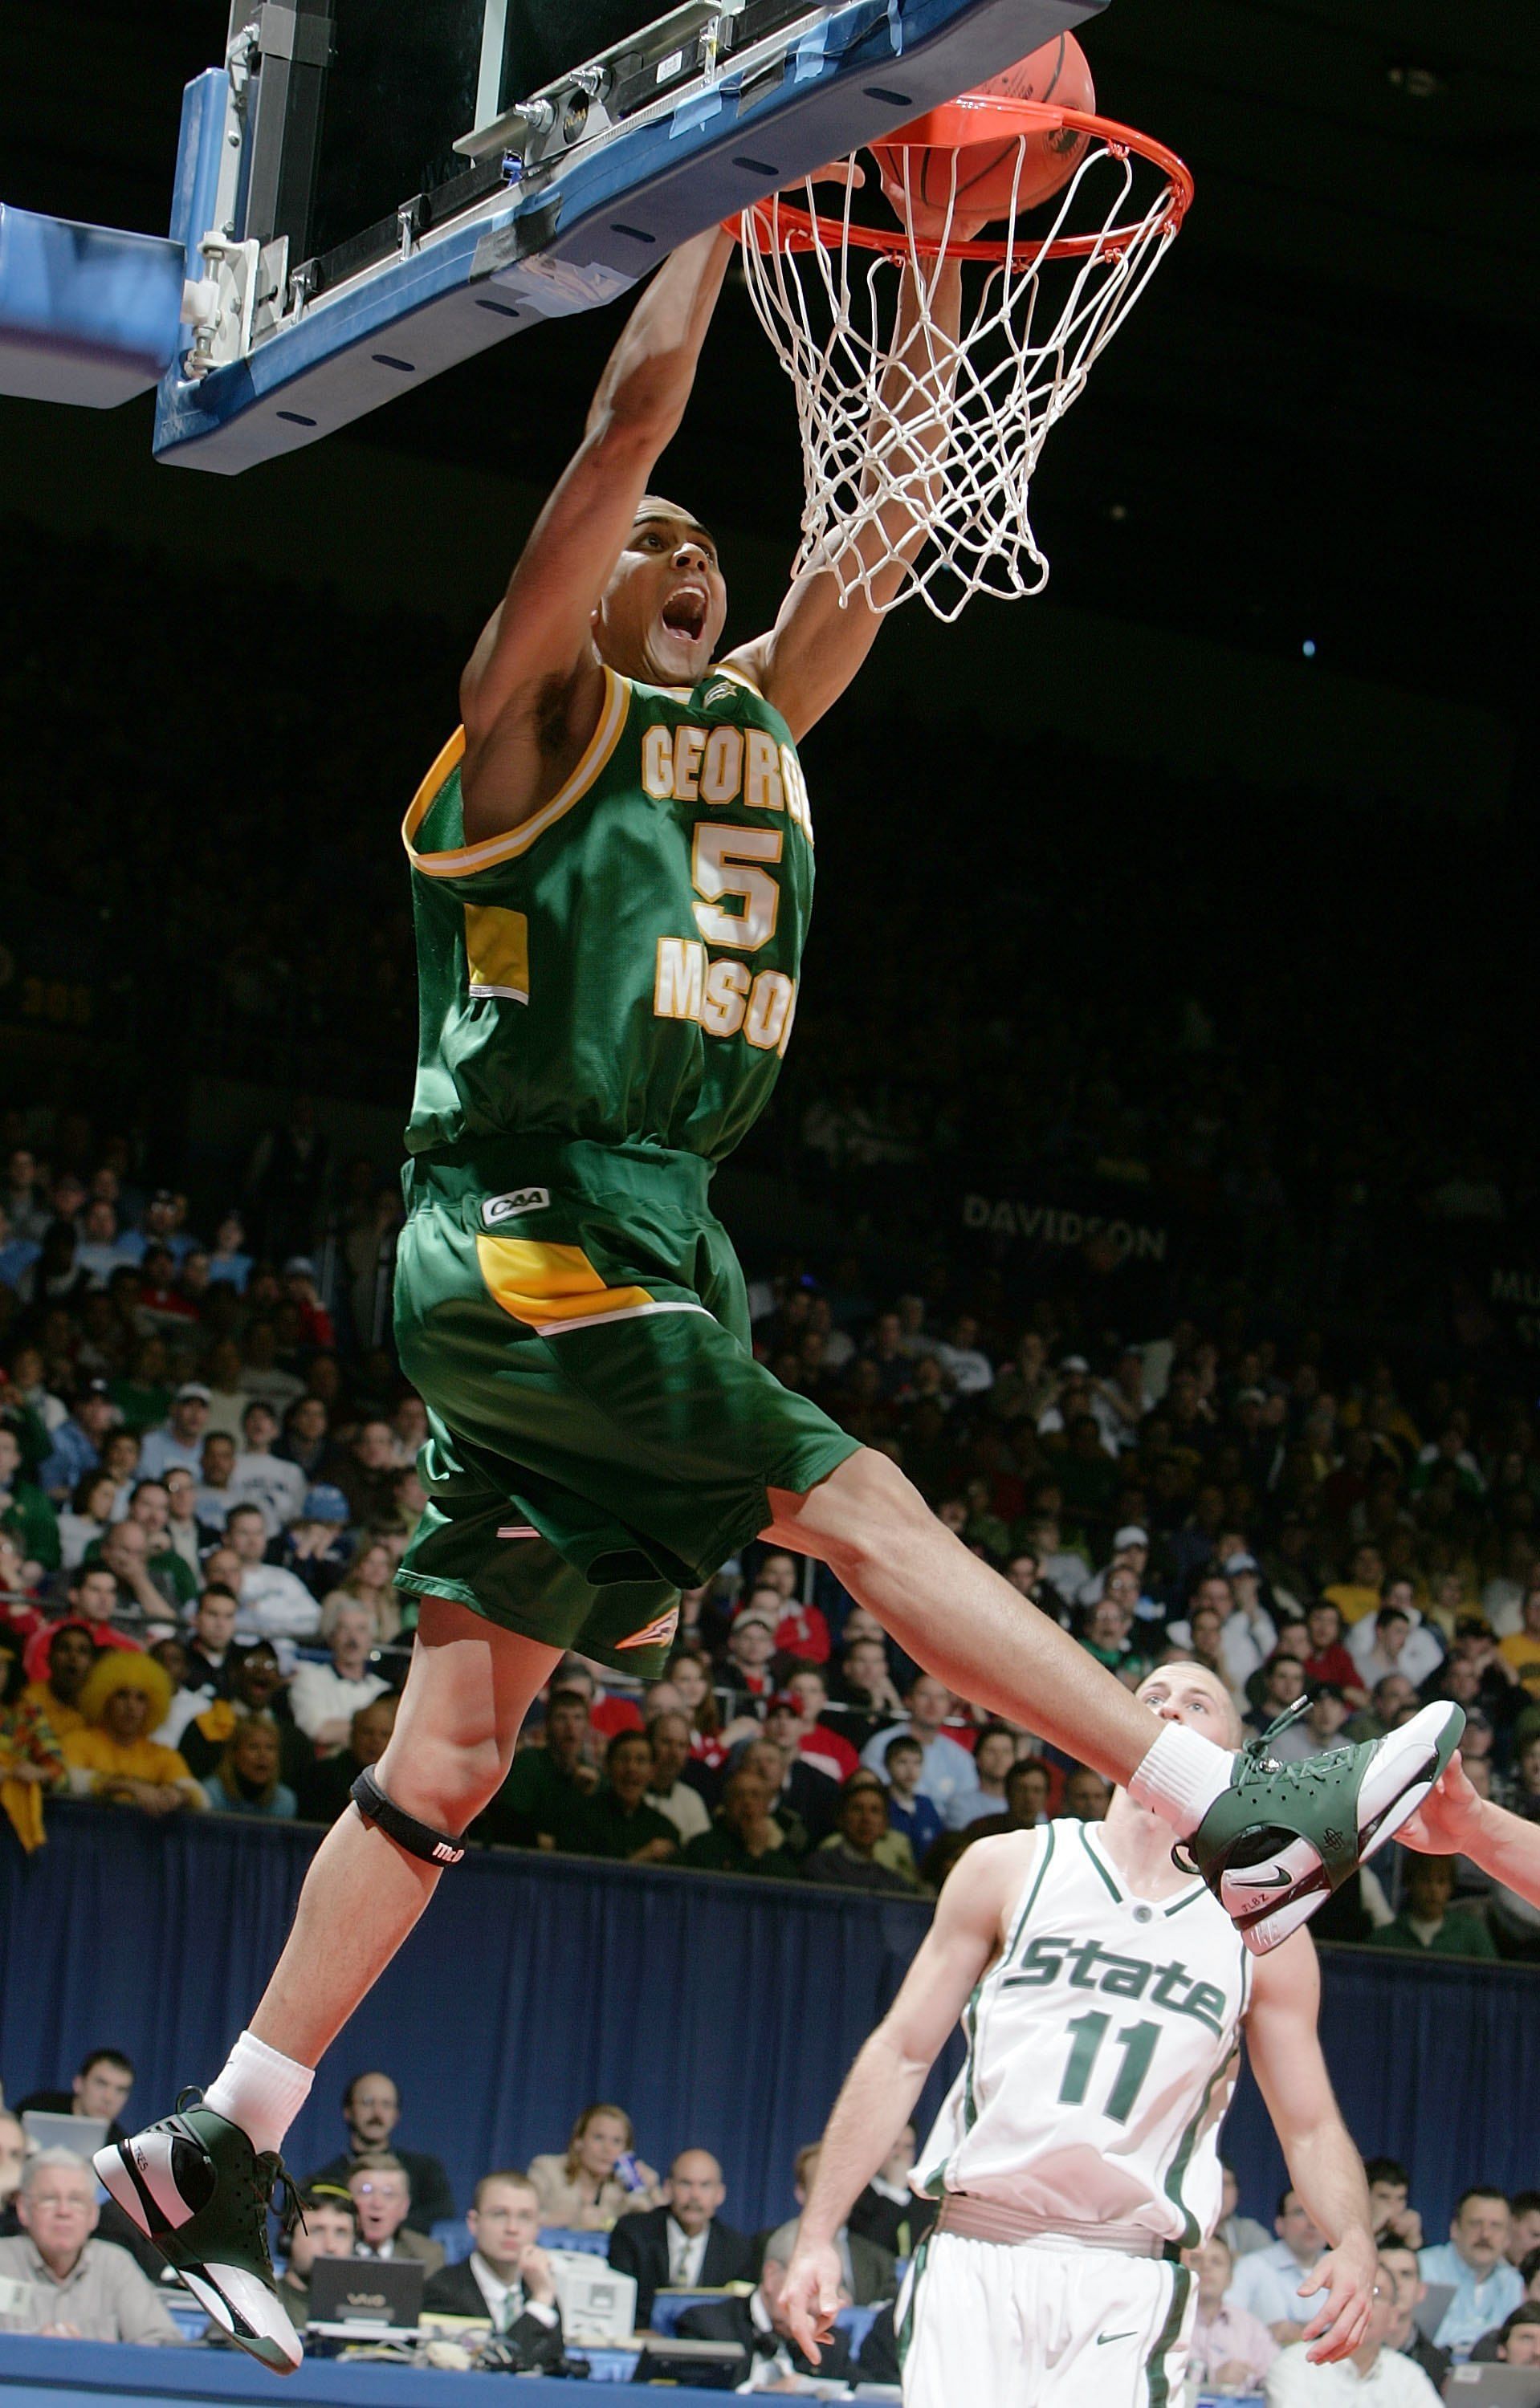 Gabe Norwood throws it down against Michigan State.